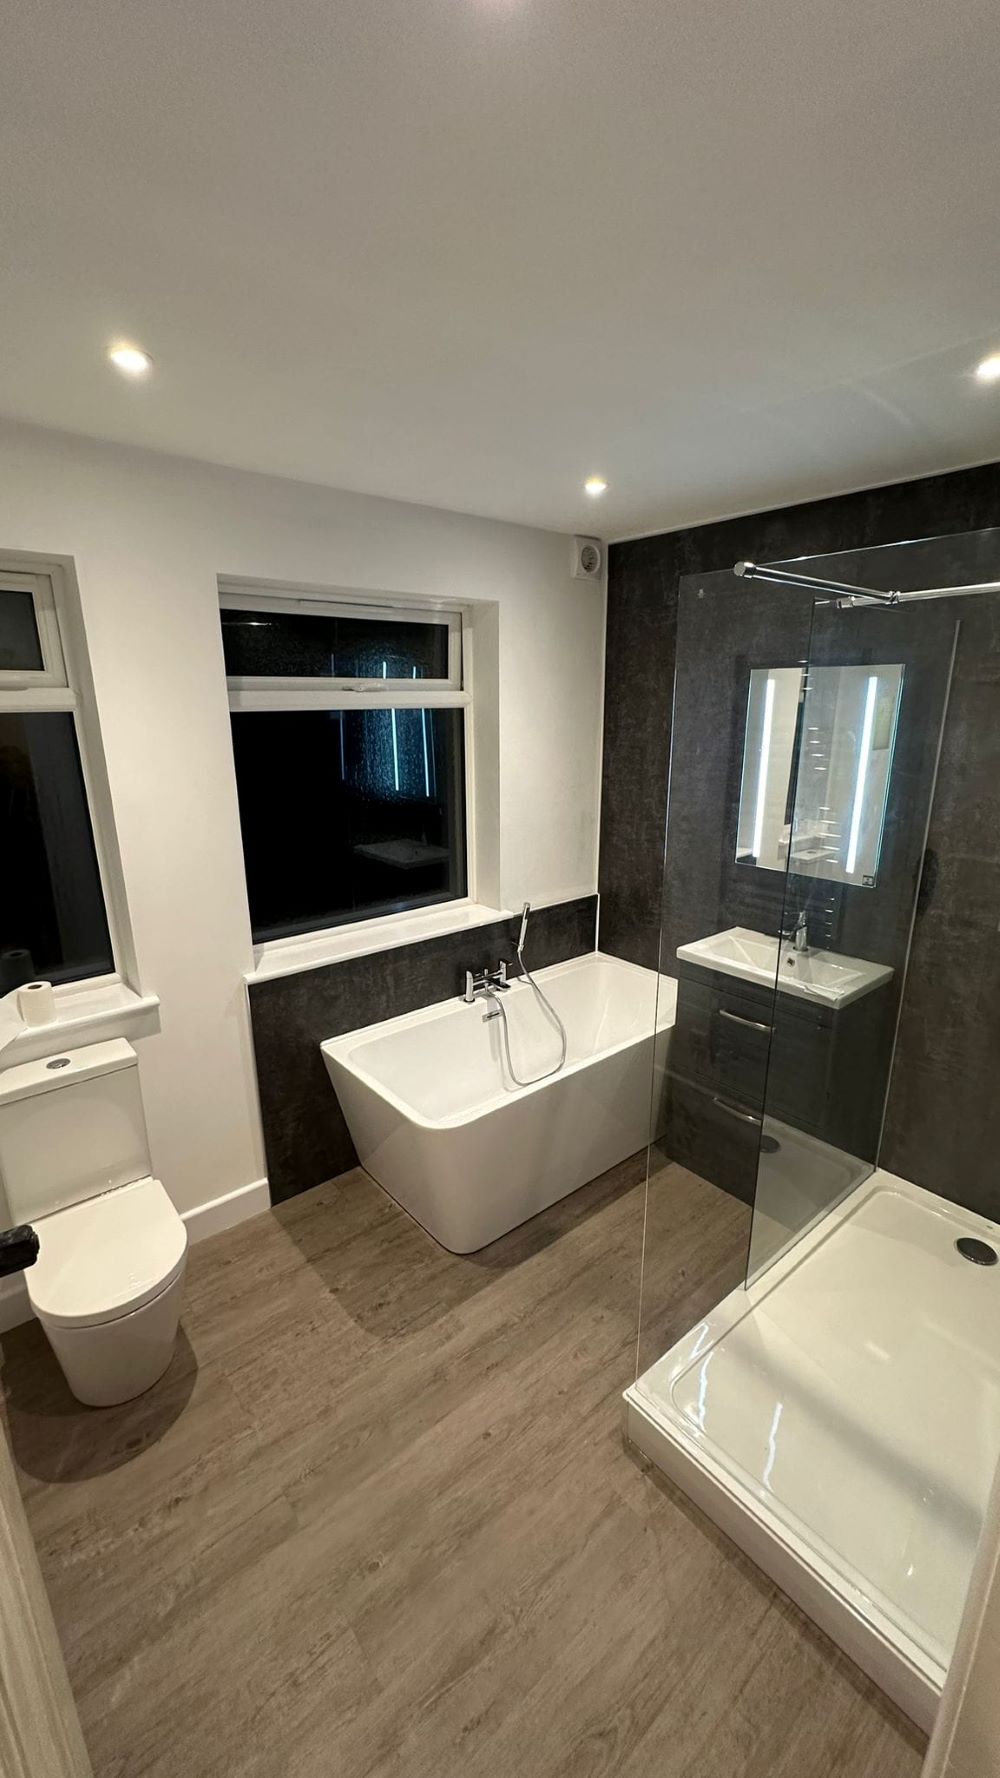 Another bathroom fit out and Wow! What a difference! 